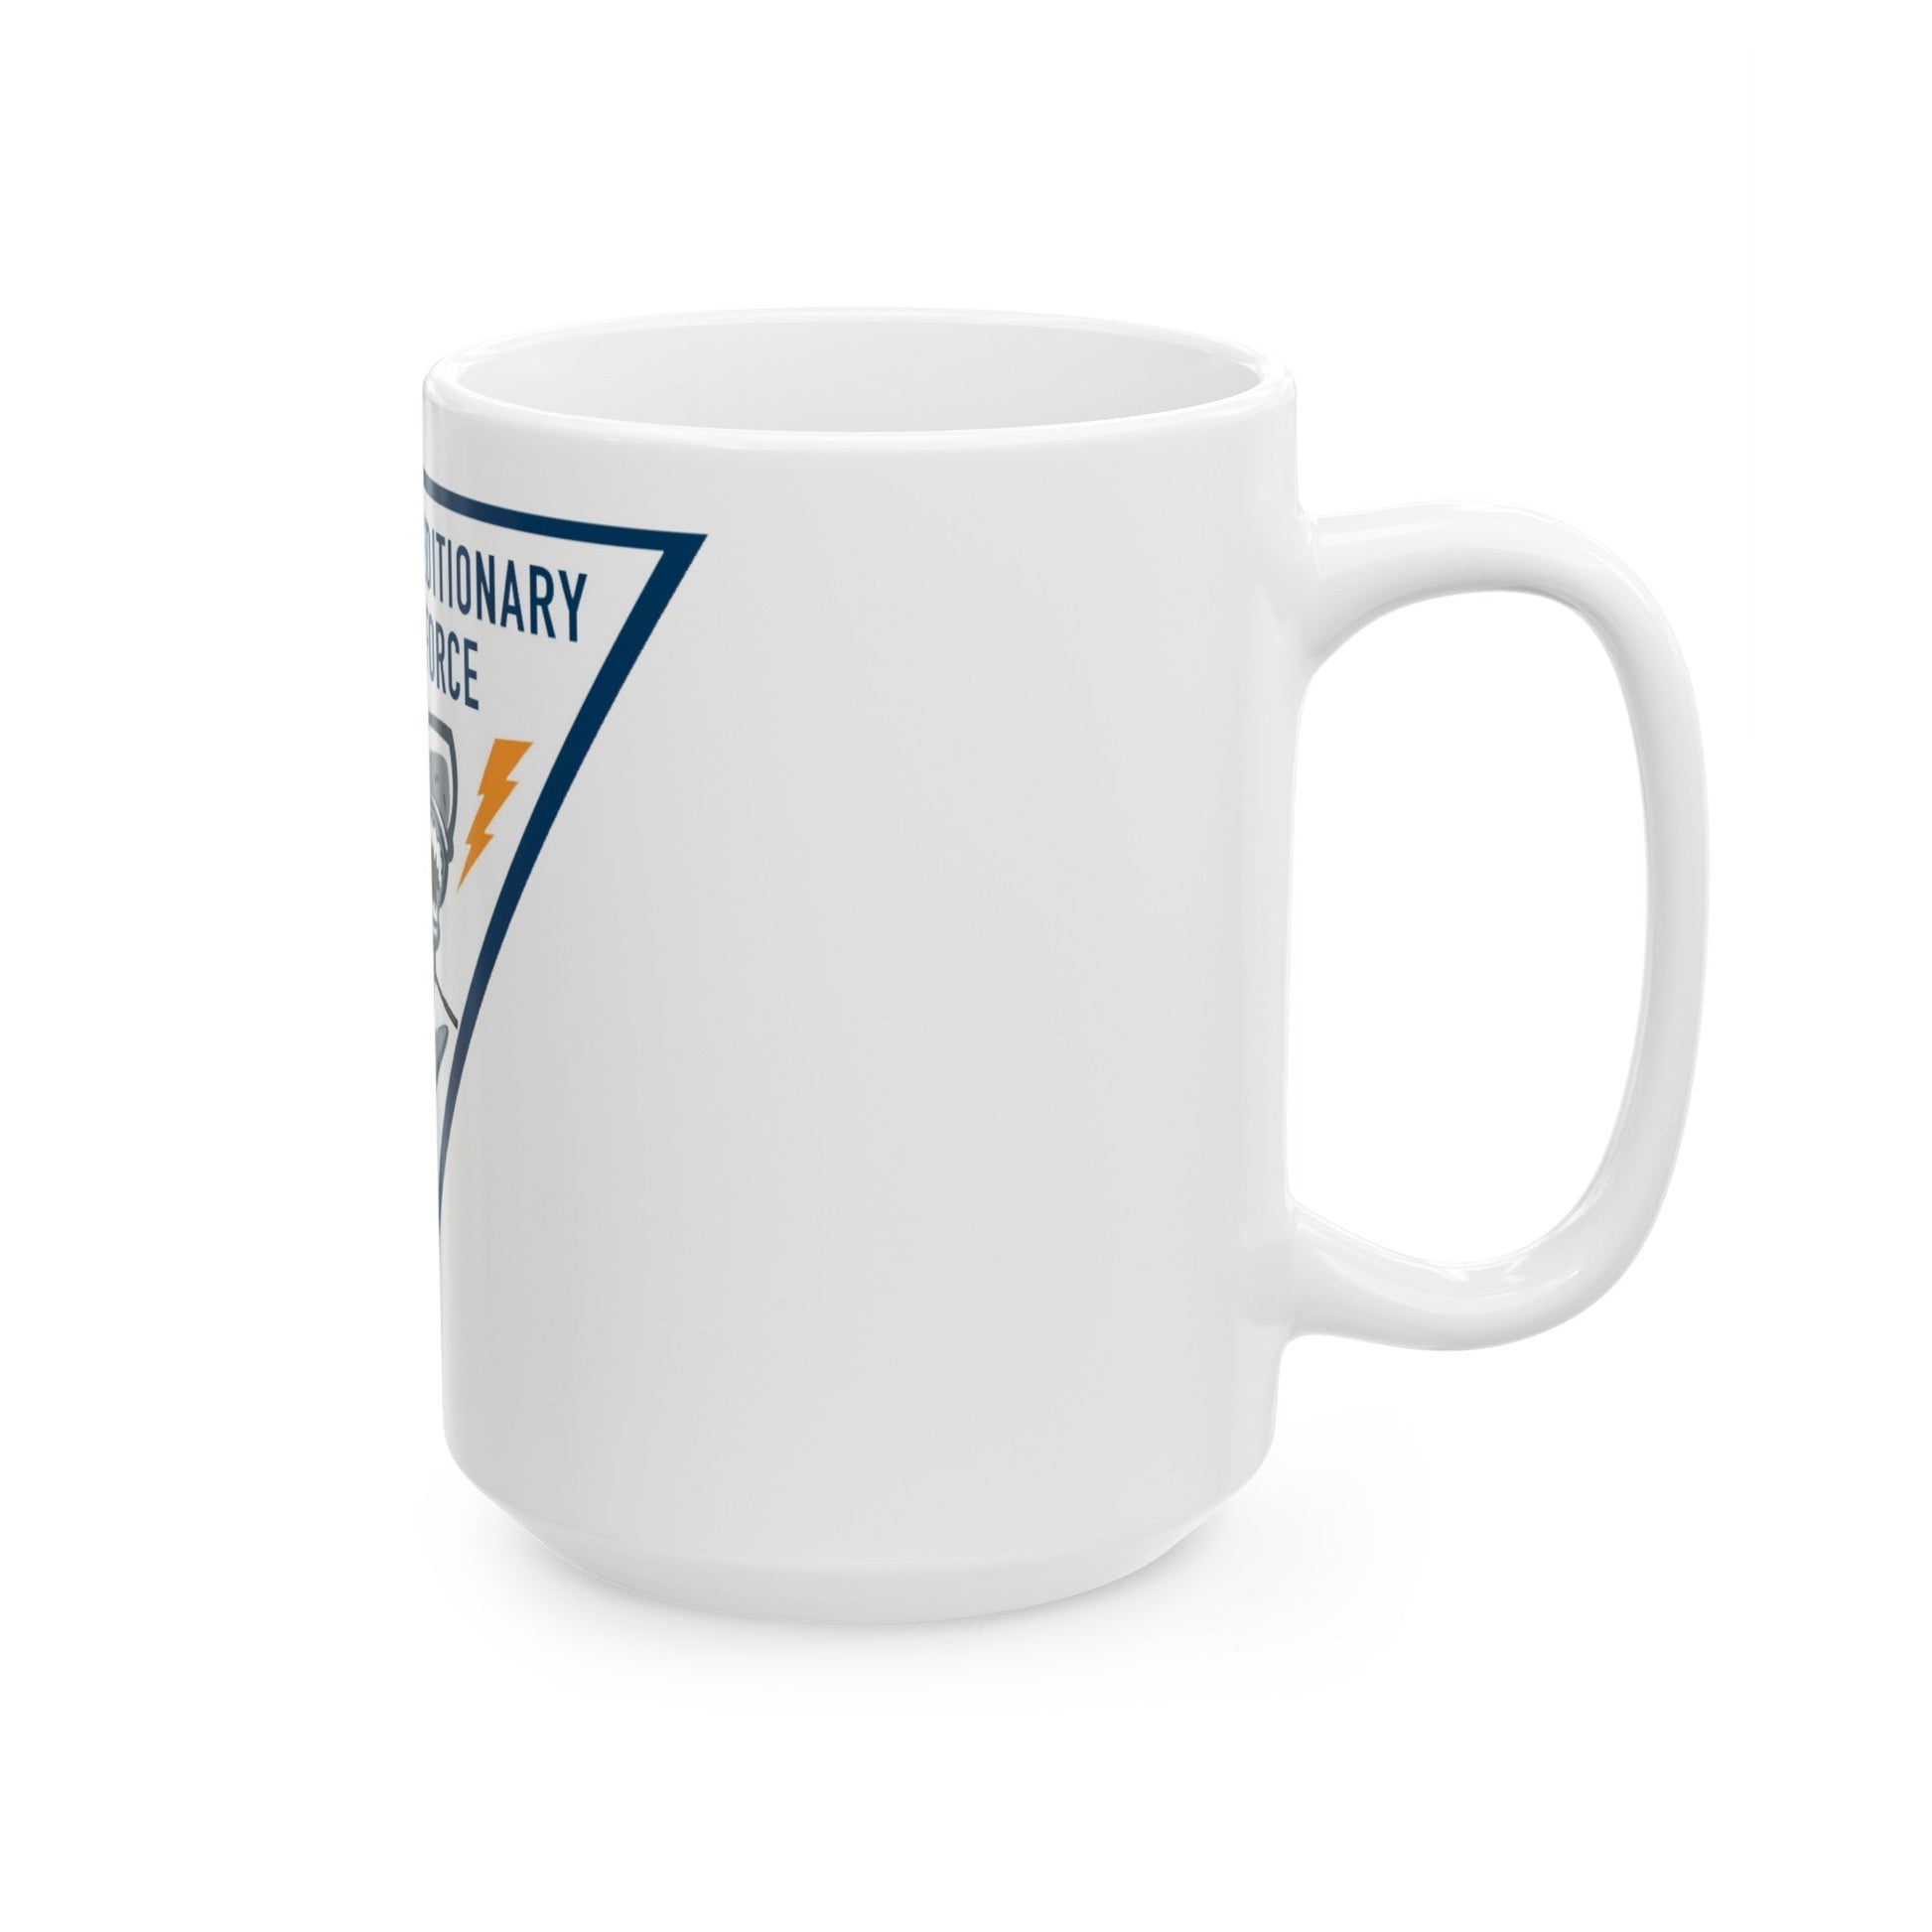 Maritime Expeditionary Security Force (U.S. Navy) White Coffee Mug-The Sticker Space